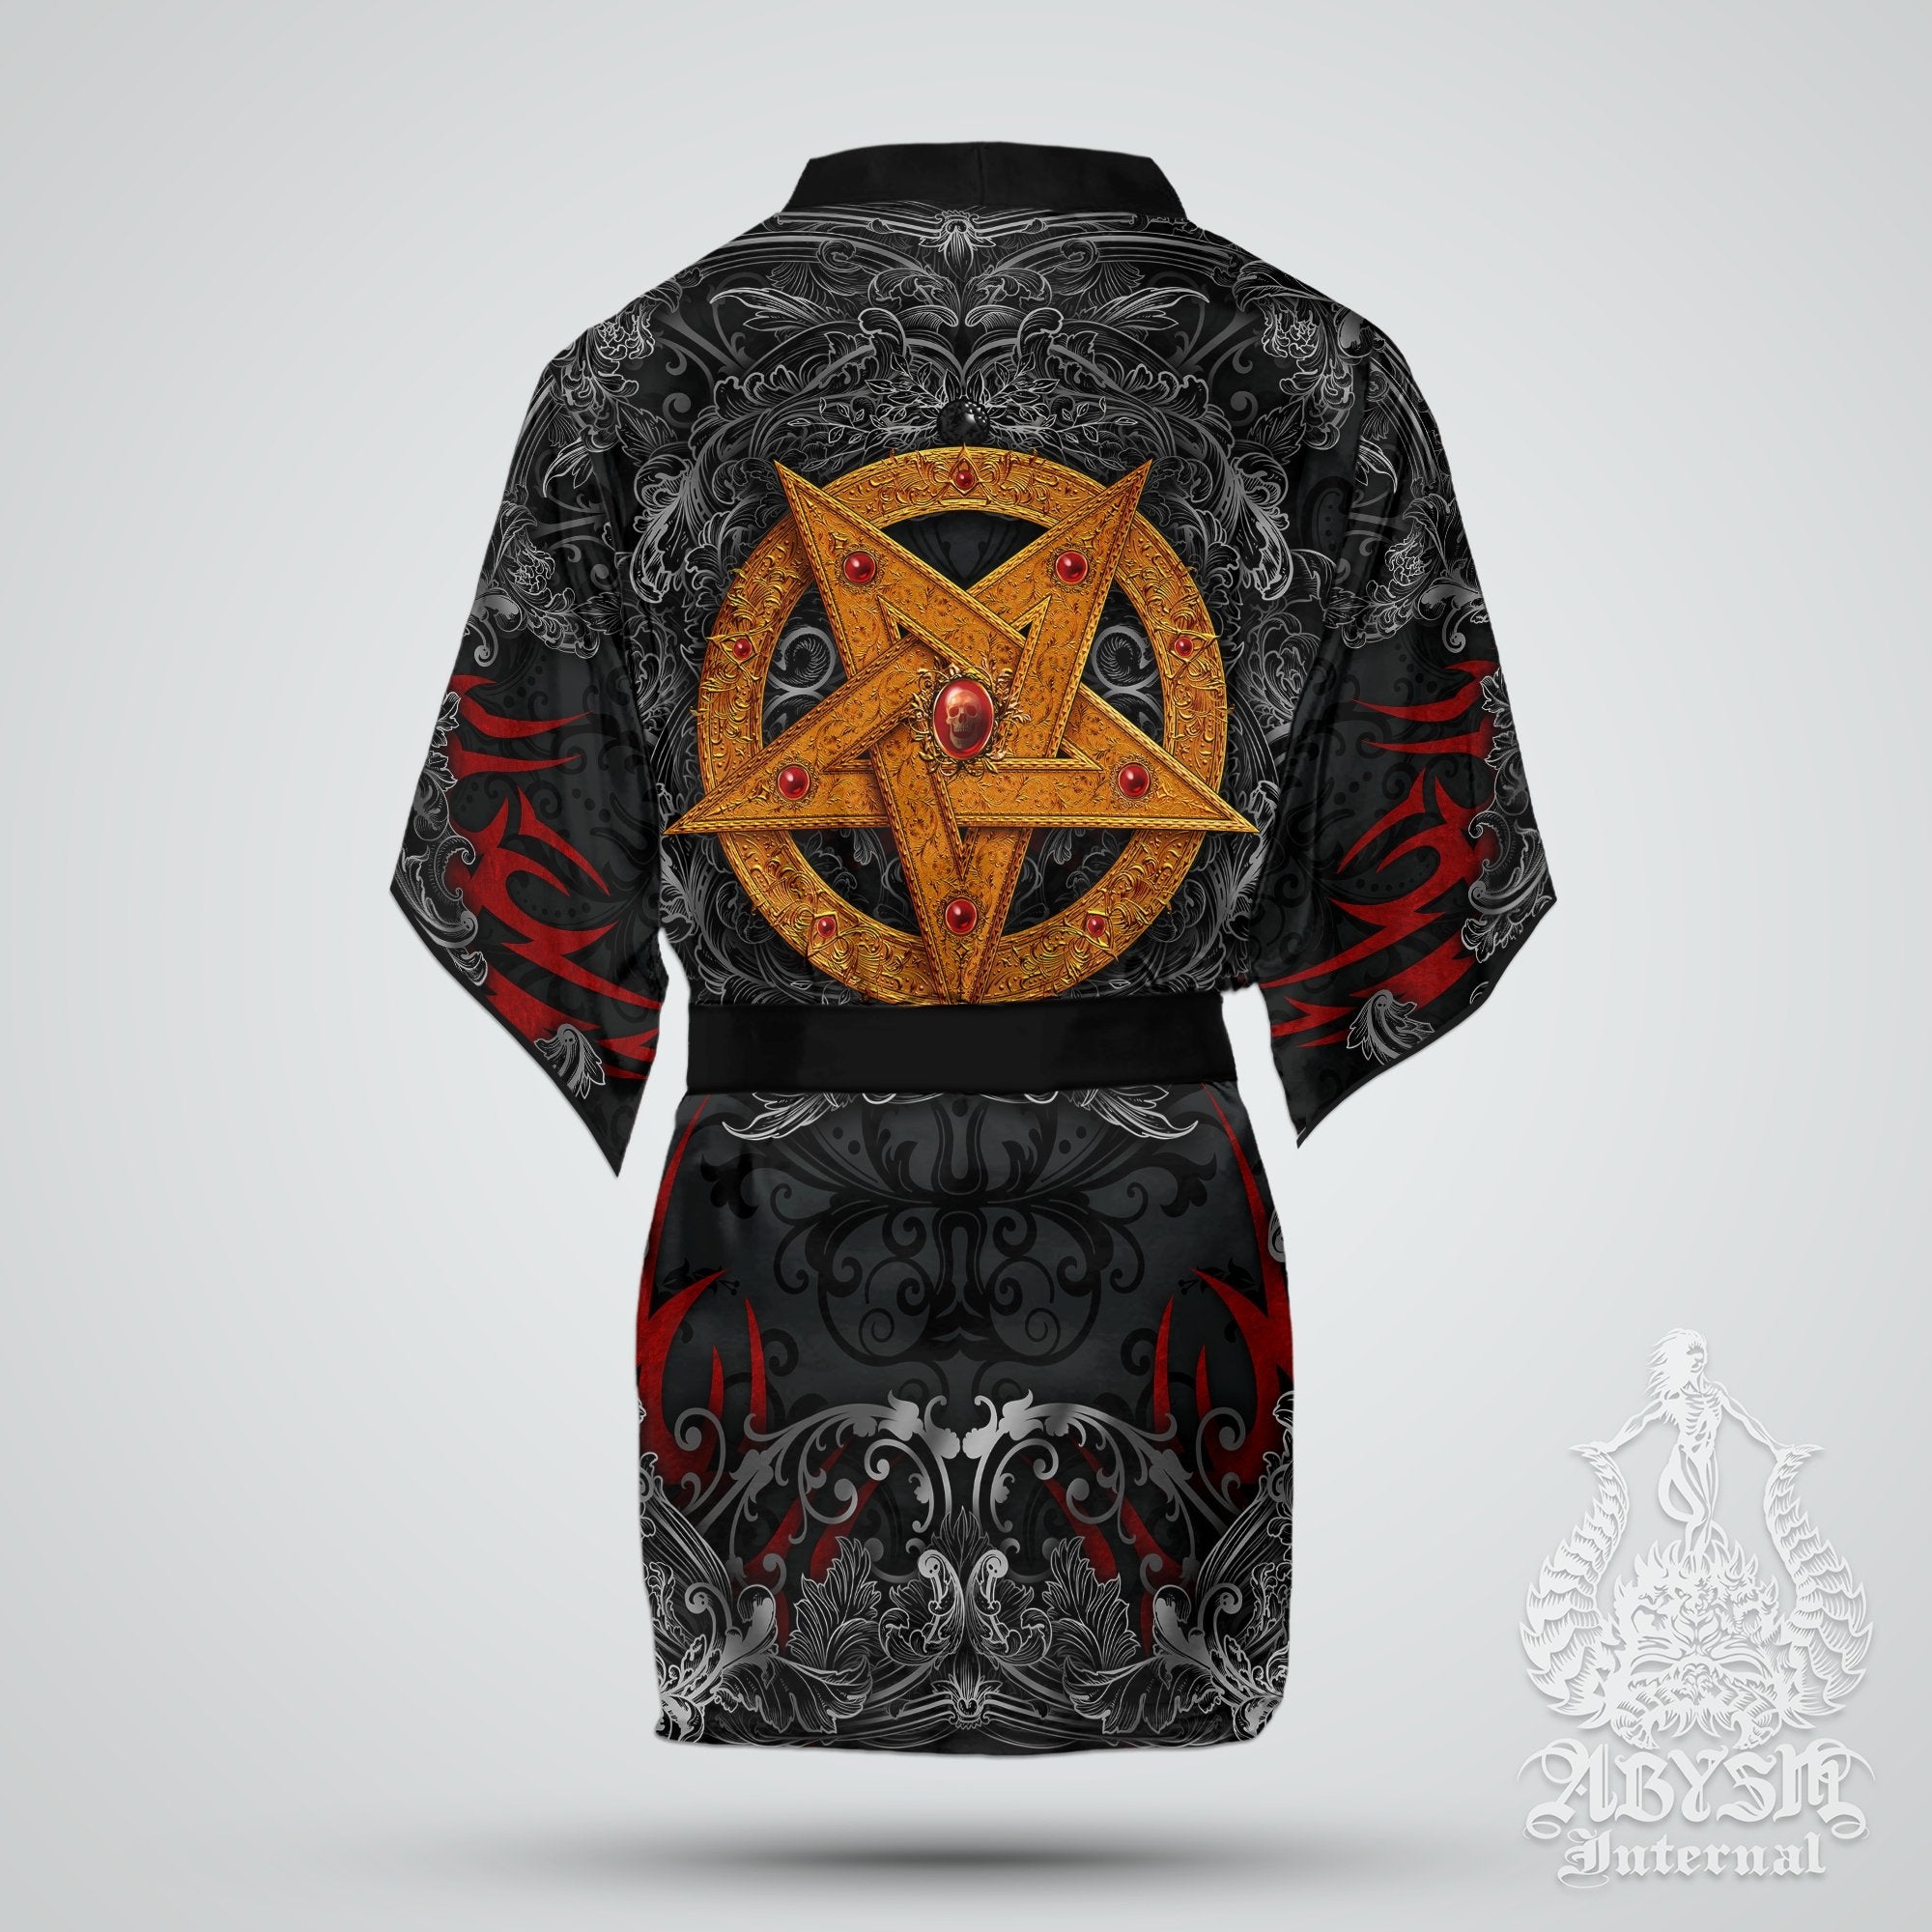 Pentagram Cover Up, Beach Outfit, Party Kimono, Metal Summer Festival Robe, Satanic Gothic Indie and Alternative Clothing, Unisex - Gold Black - Abysm Internal